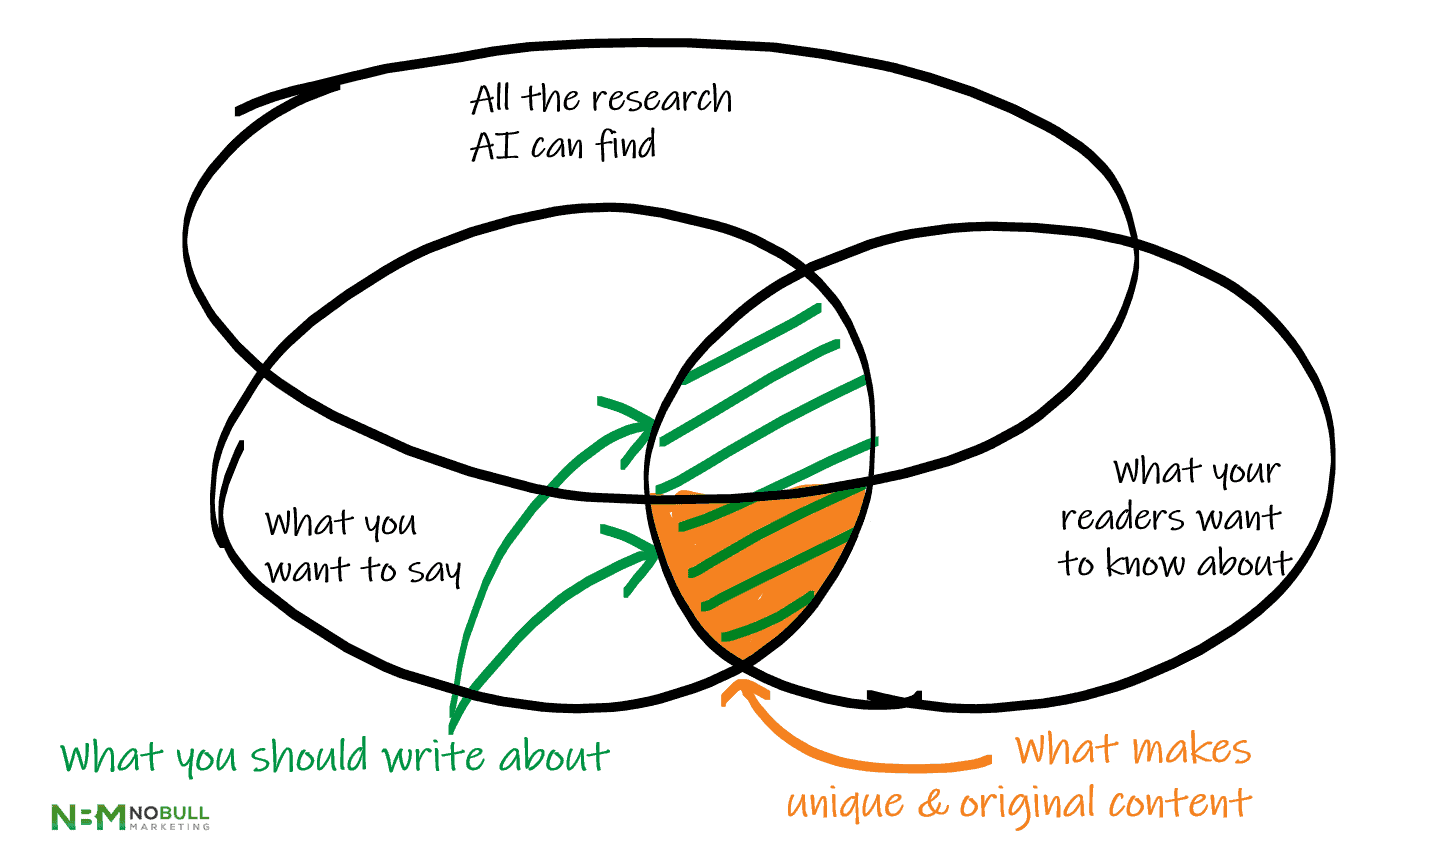 Venn diagram showing what you should write about (intersection of what you want to say and what readers want to know about) and also what makes original content (the part of that which is not found by AI research)